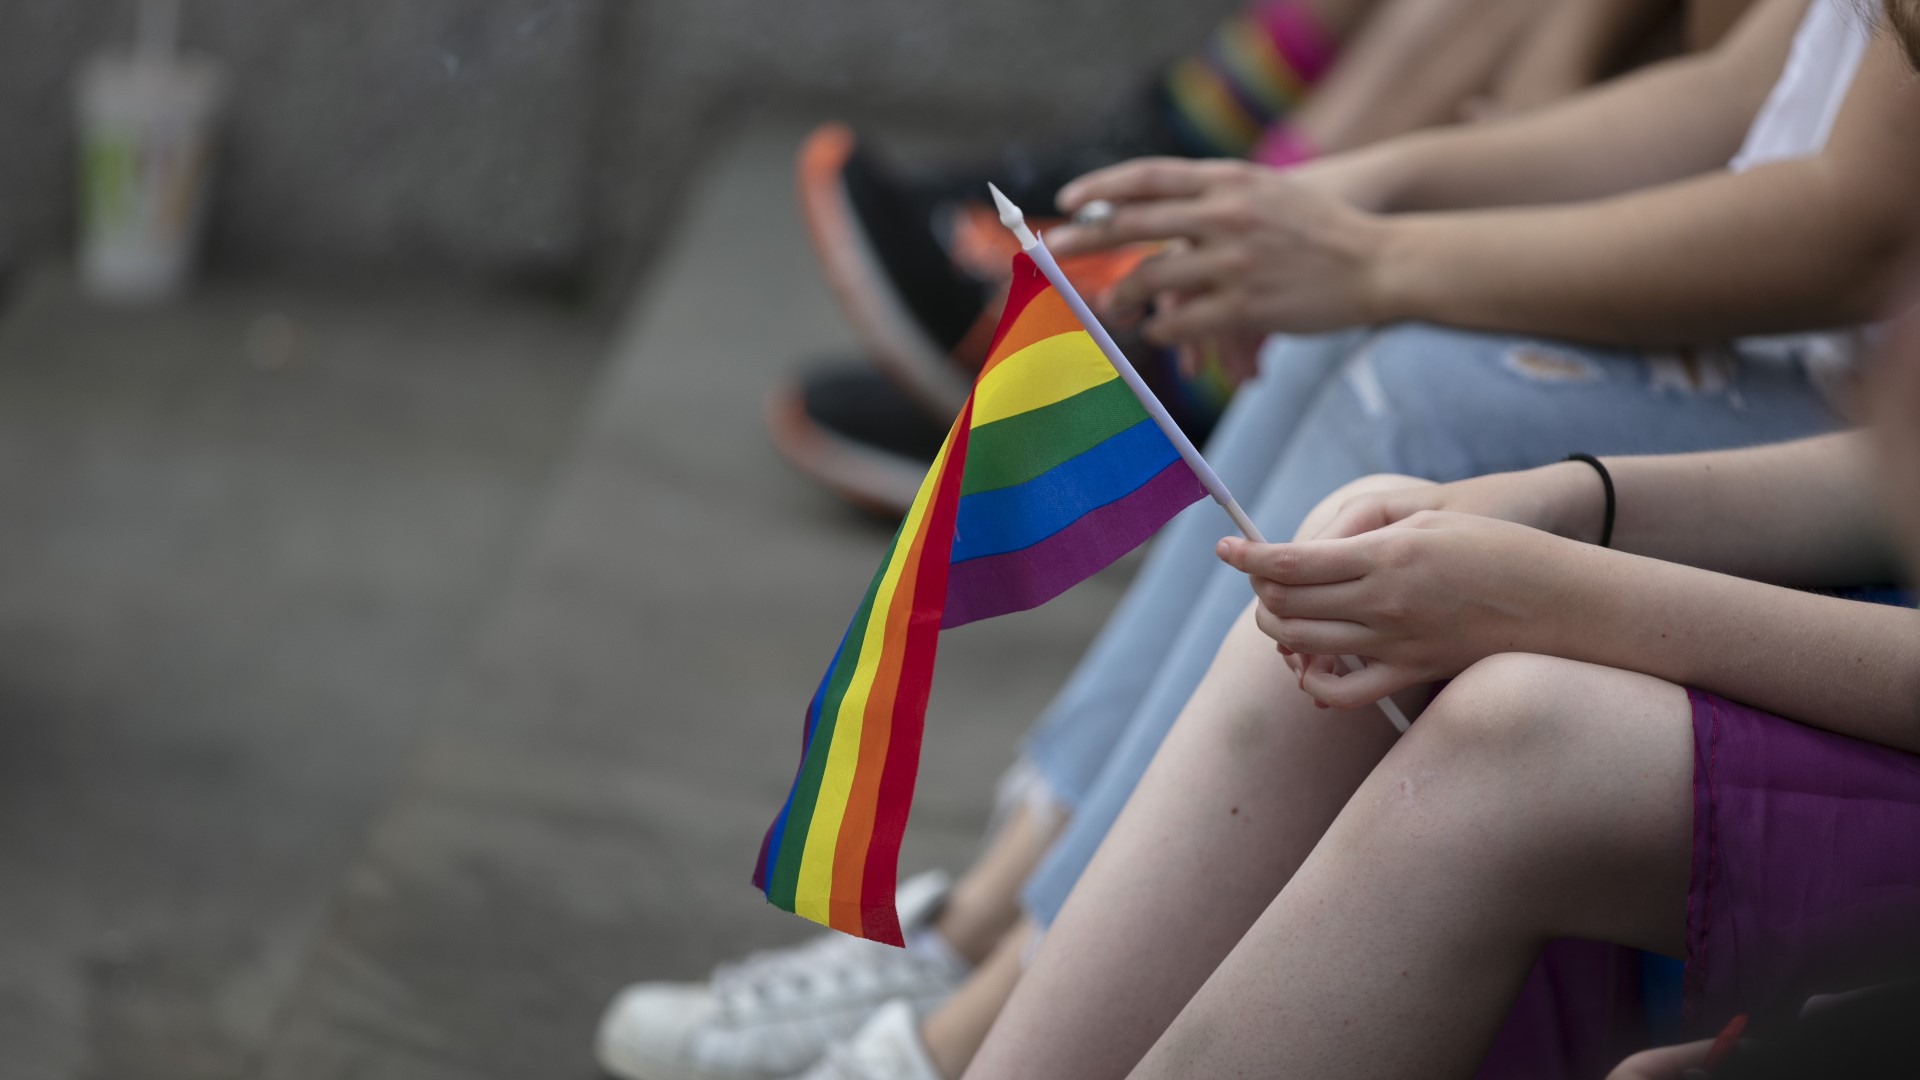 The pandemic is hitting LGBTQ youth especially hard as they deal with the stressors they had before COVID-19, and now the impacts of the virus.